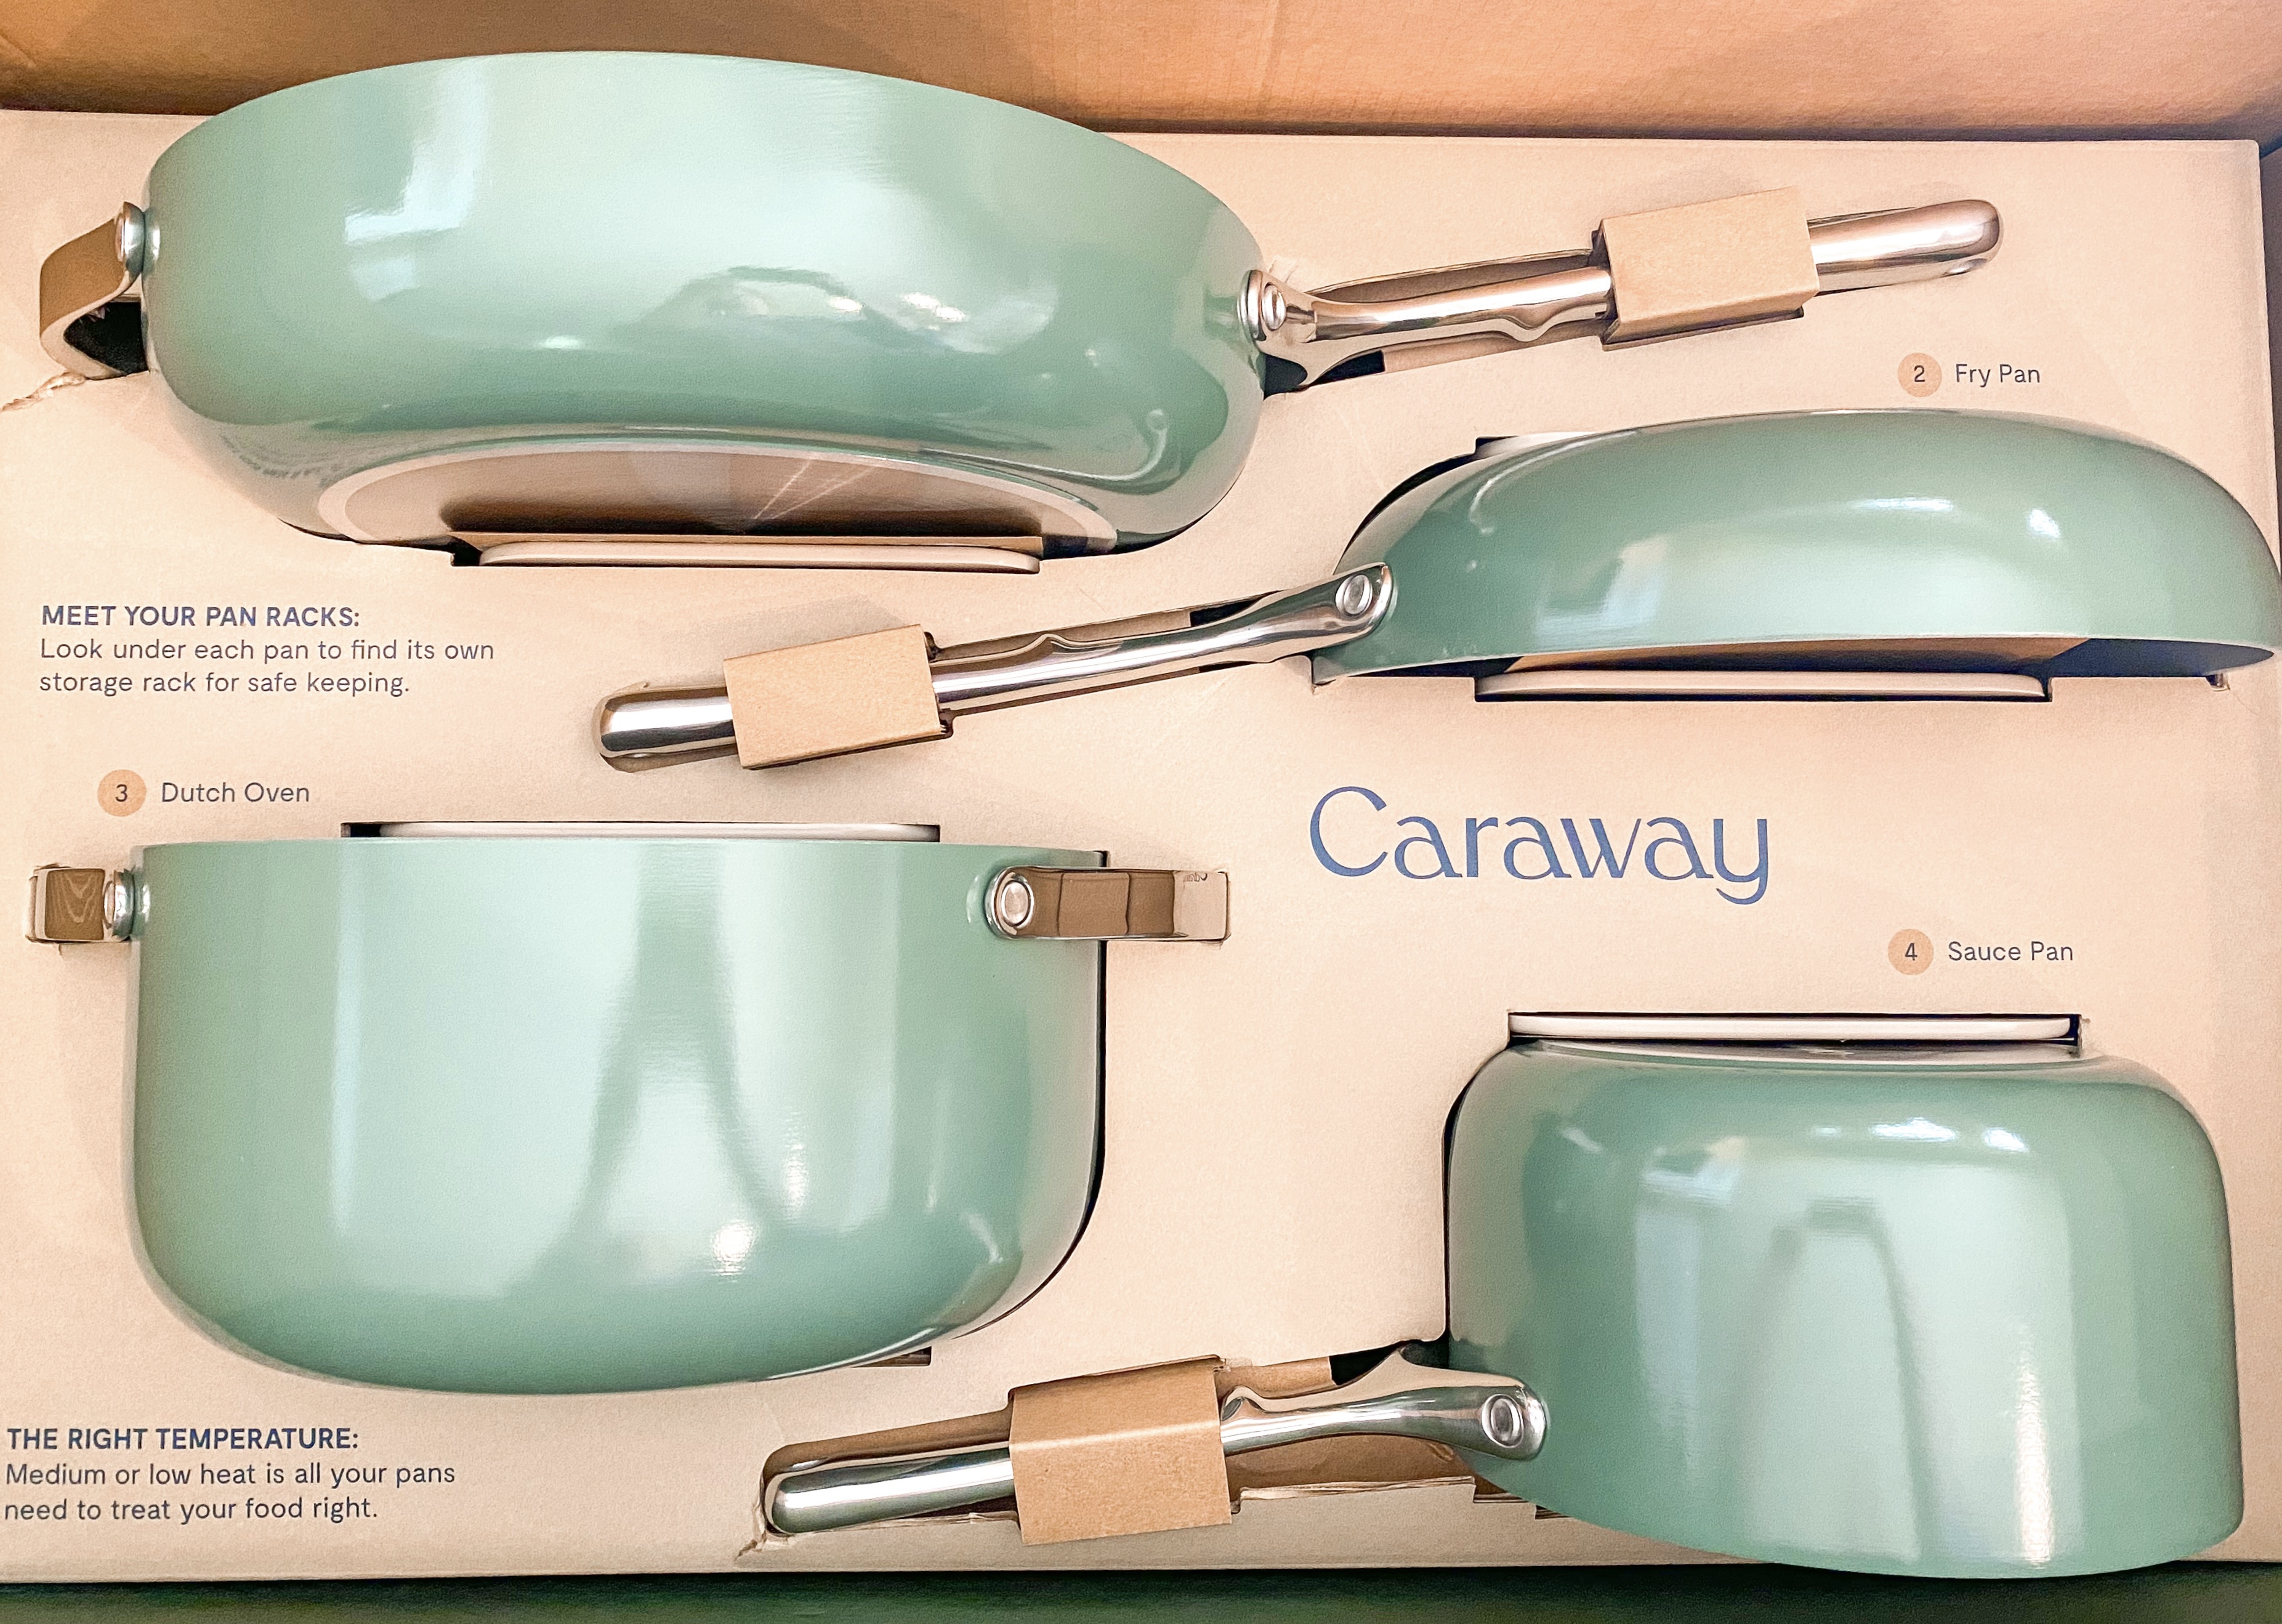 Introducing The Caraway Home Bakeware Collection